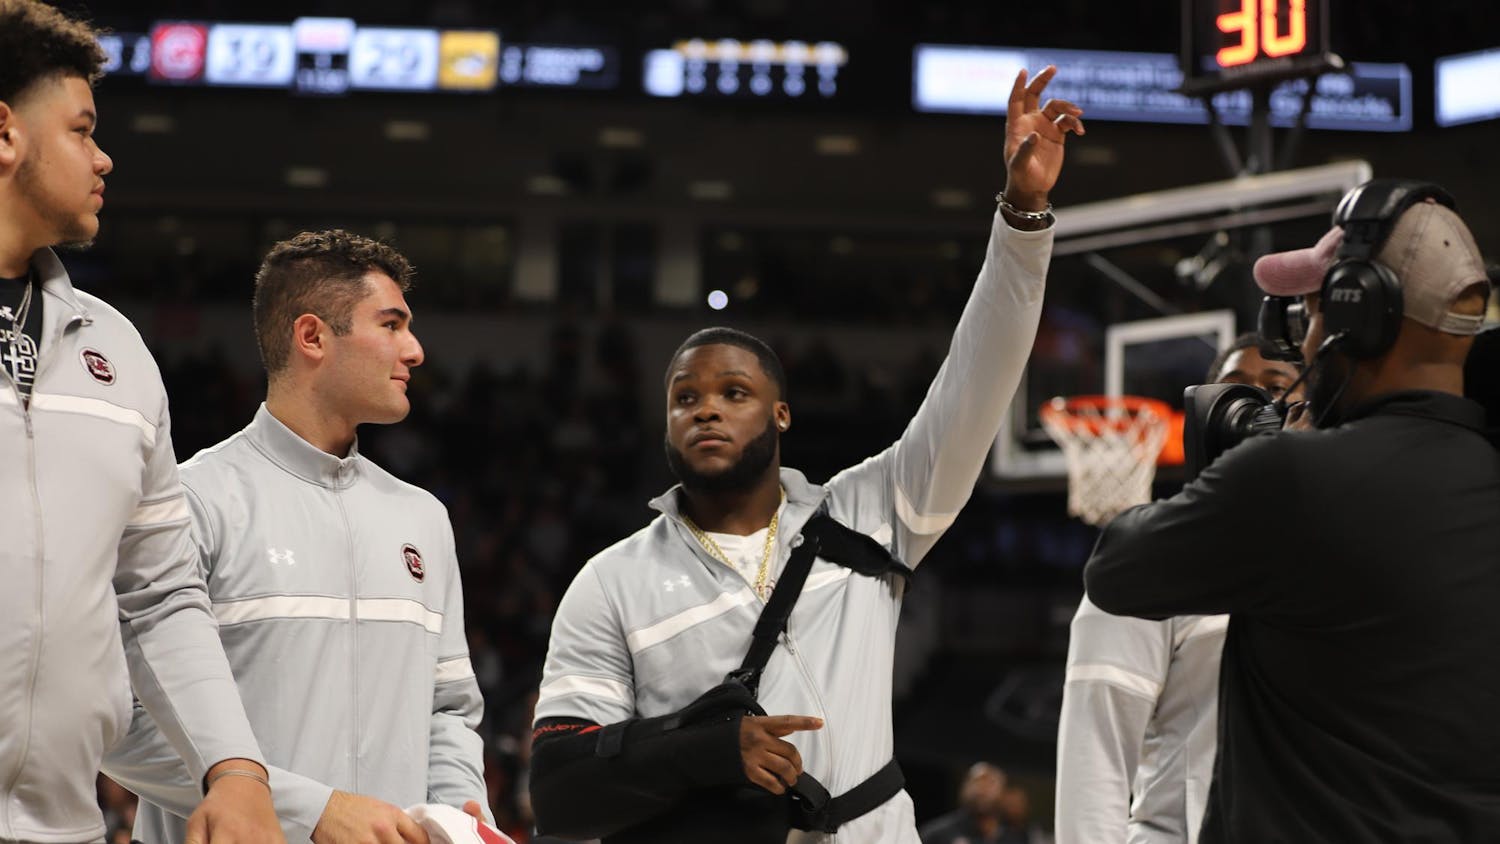 Incoming senior running back Raheim "Rocket" Sanders waves to the crowd during a recognition ceremony for new ɫɫƵ football players before the South Carolina's men's basketball game against Missouri at Colonial Life Arena on Jan. 27, 2024. Sanders will spend his remaining year of eligibility with the ɫɫƵs after transferring from Arkansas, where he rushed for 2,230 yards with 17 touchdowns over three seasons.